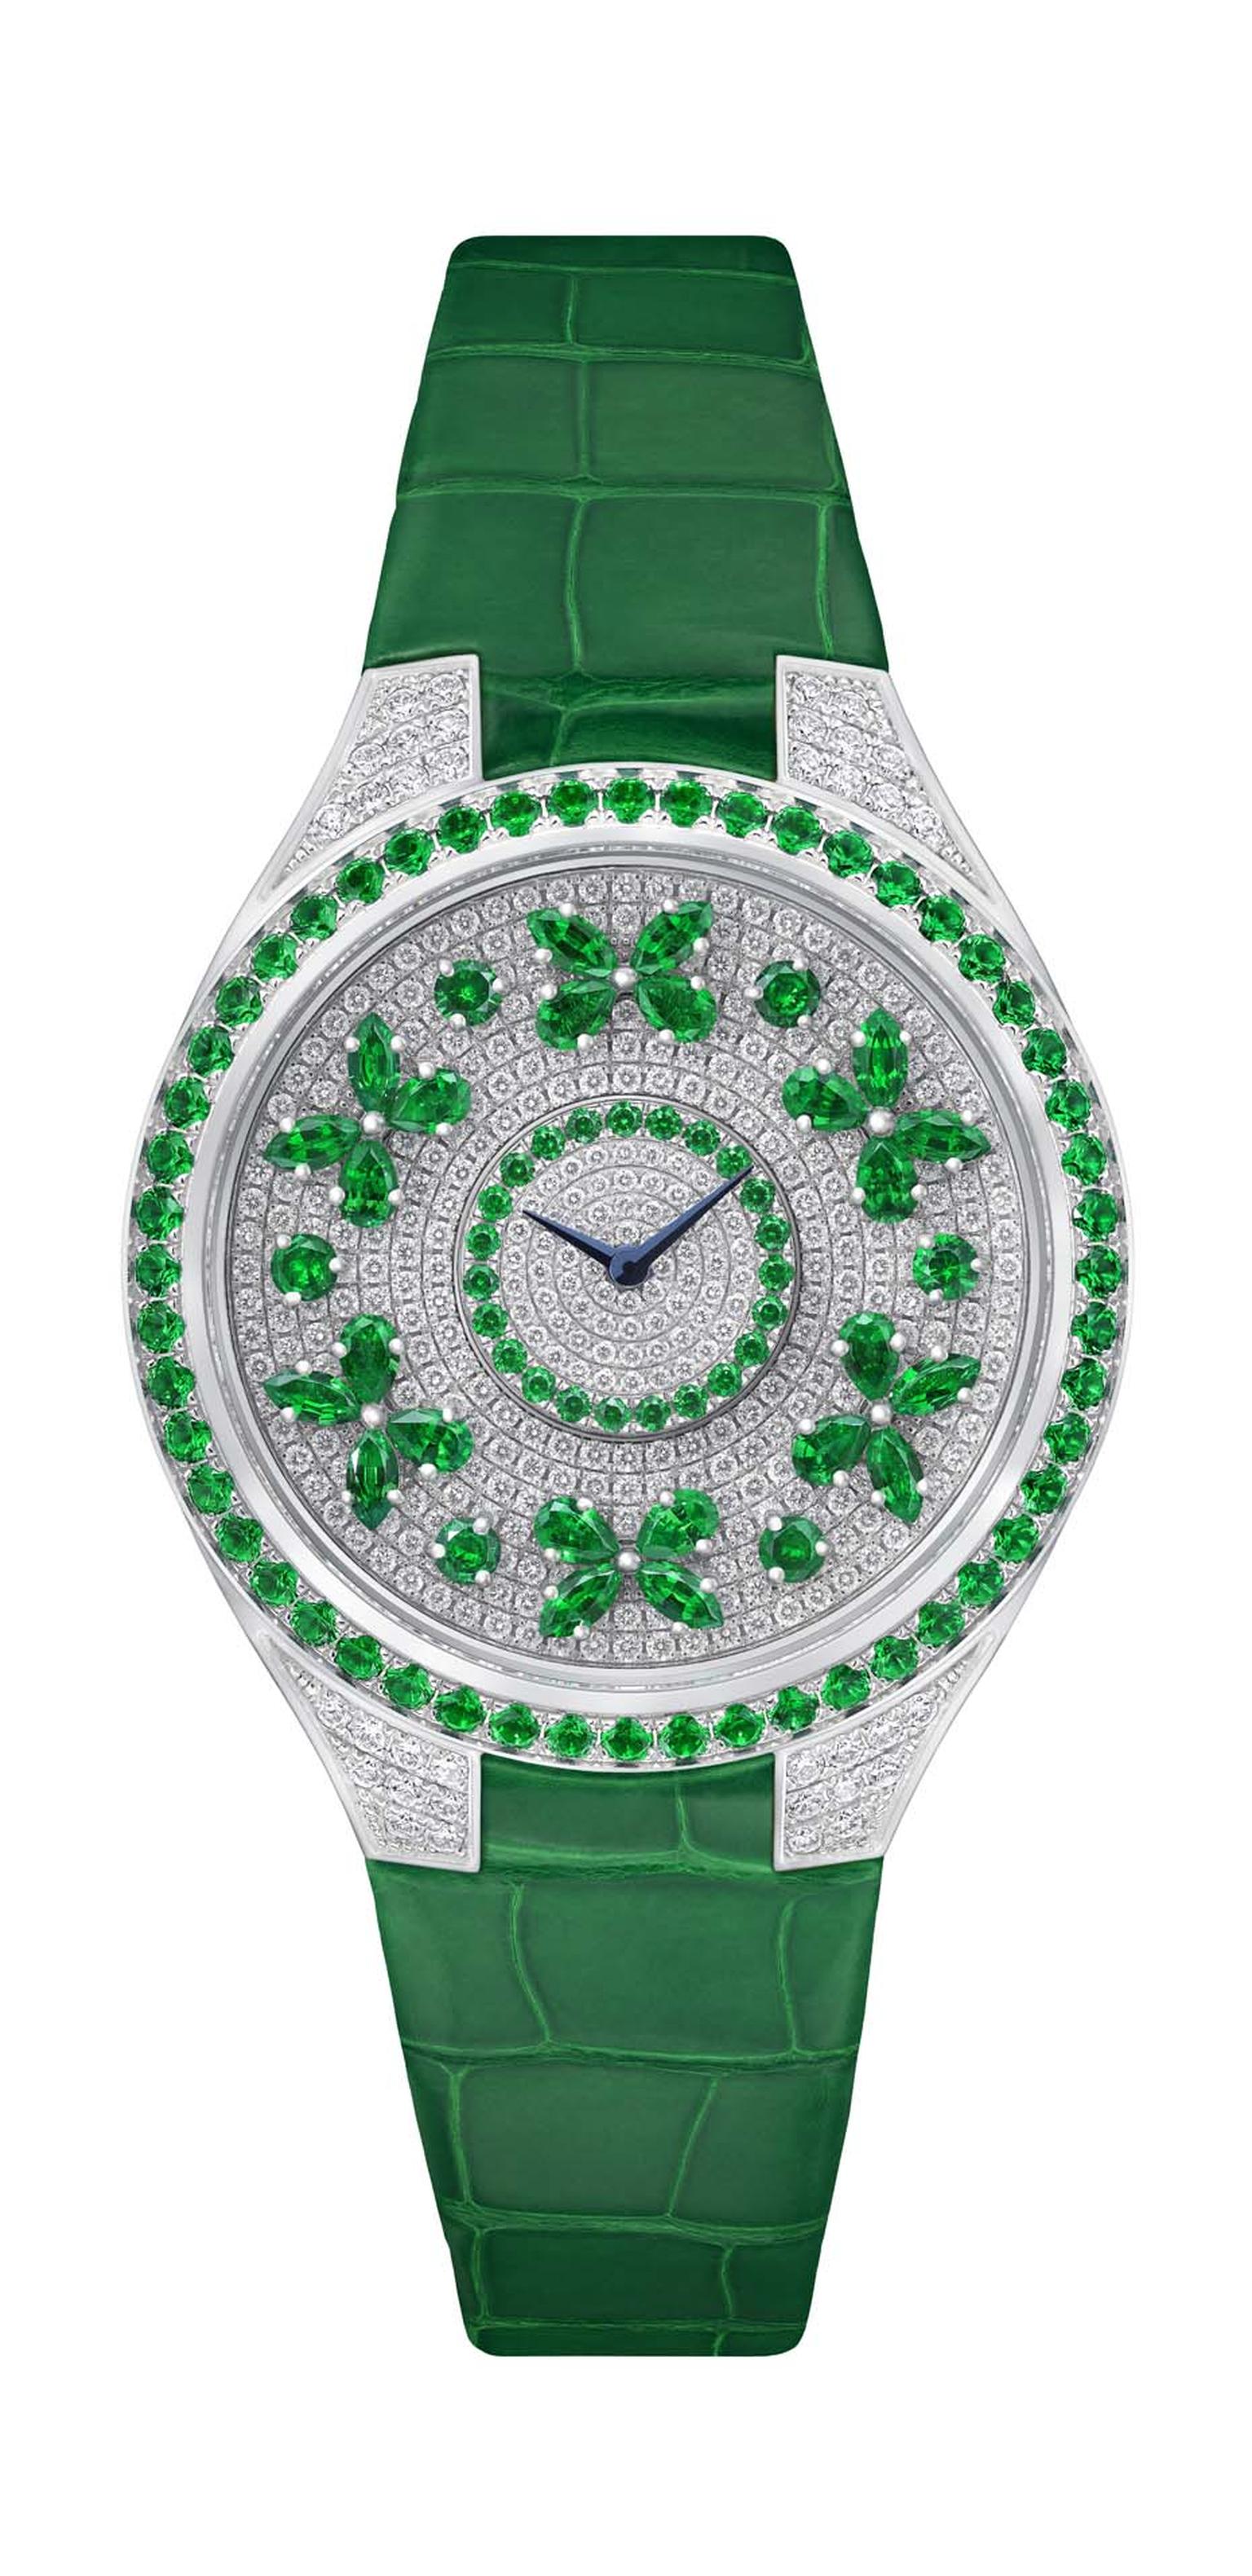 Butterfly and fish watches_Graff_Butterfly disco white and emerald diamond watch.jpg